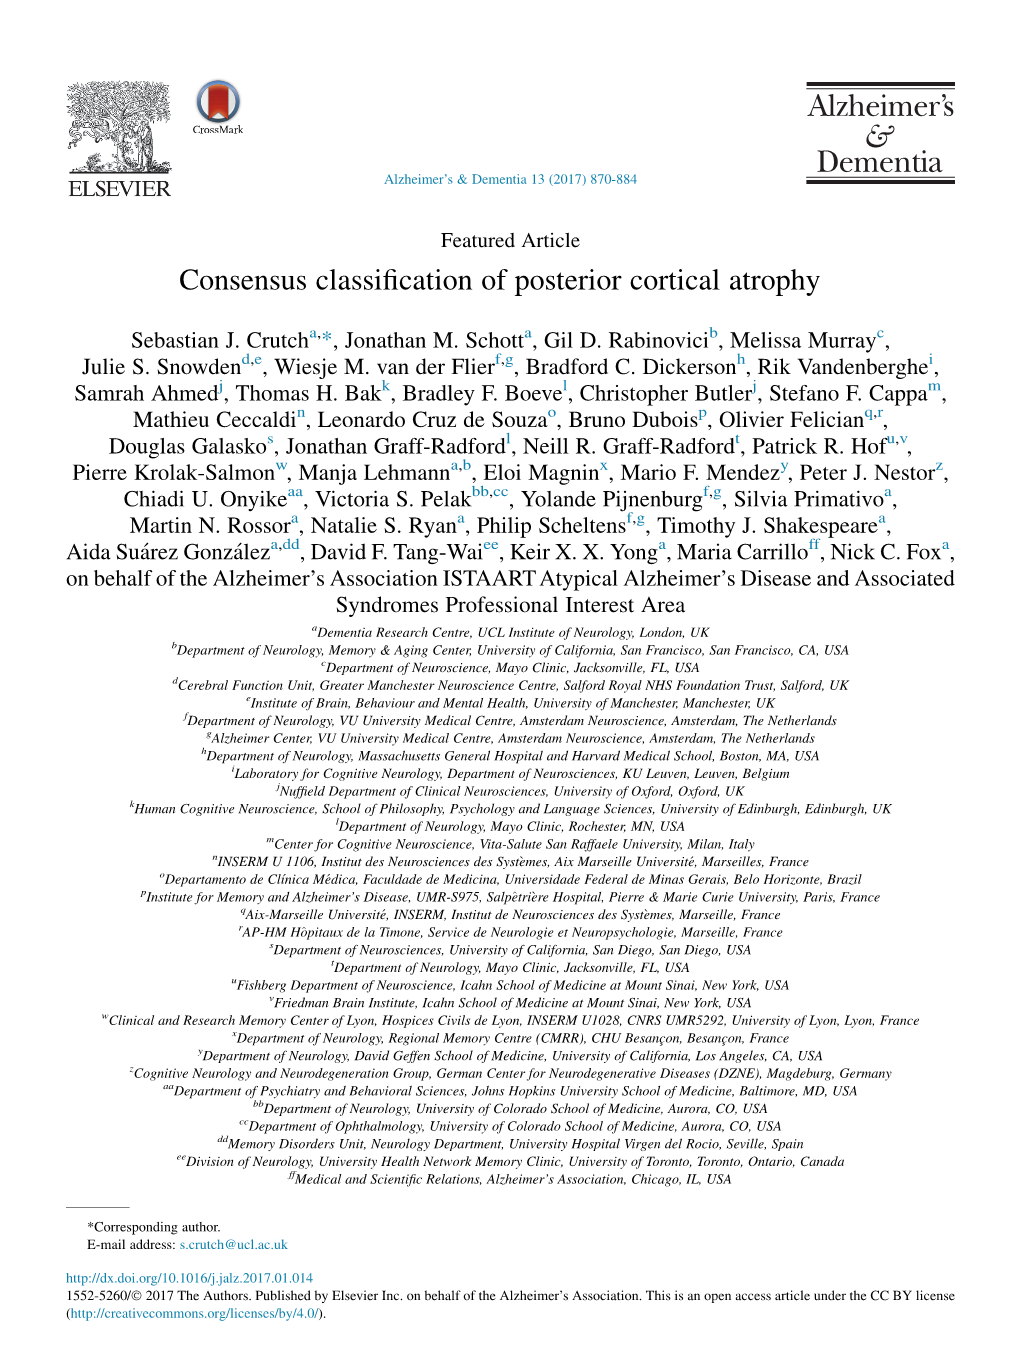 Consensus Classification of Posterior Cortical Atrophy